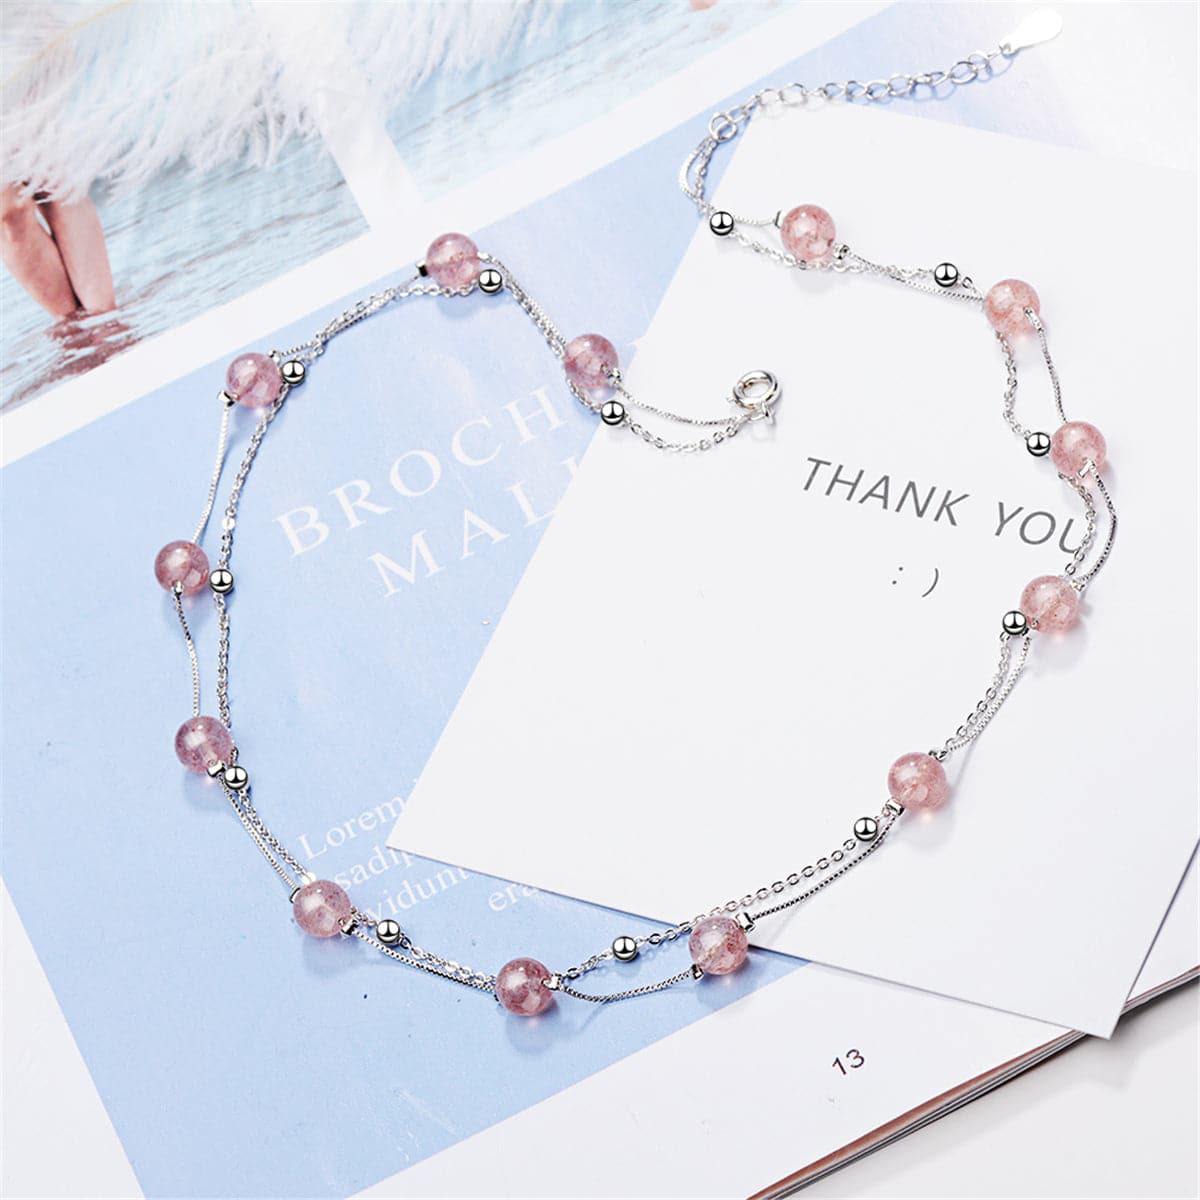 Strawberry Red Crystal & Silver-Plated Station Necklace